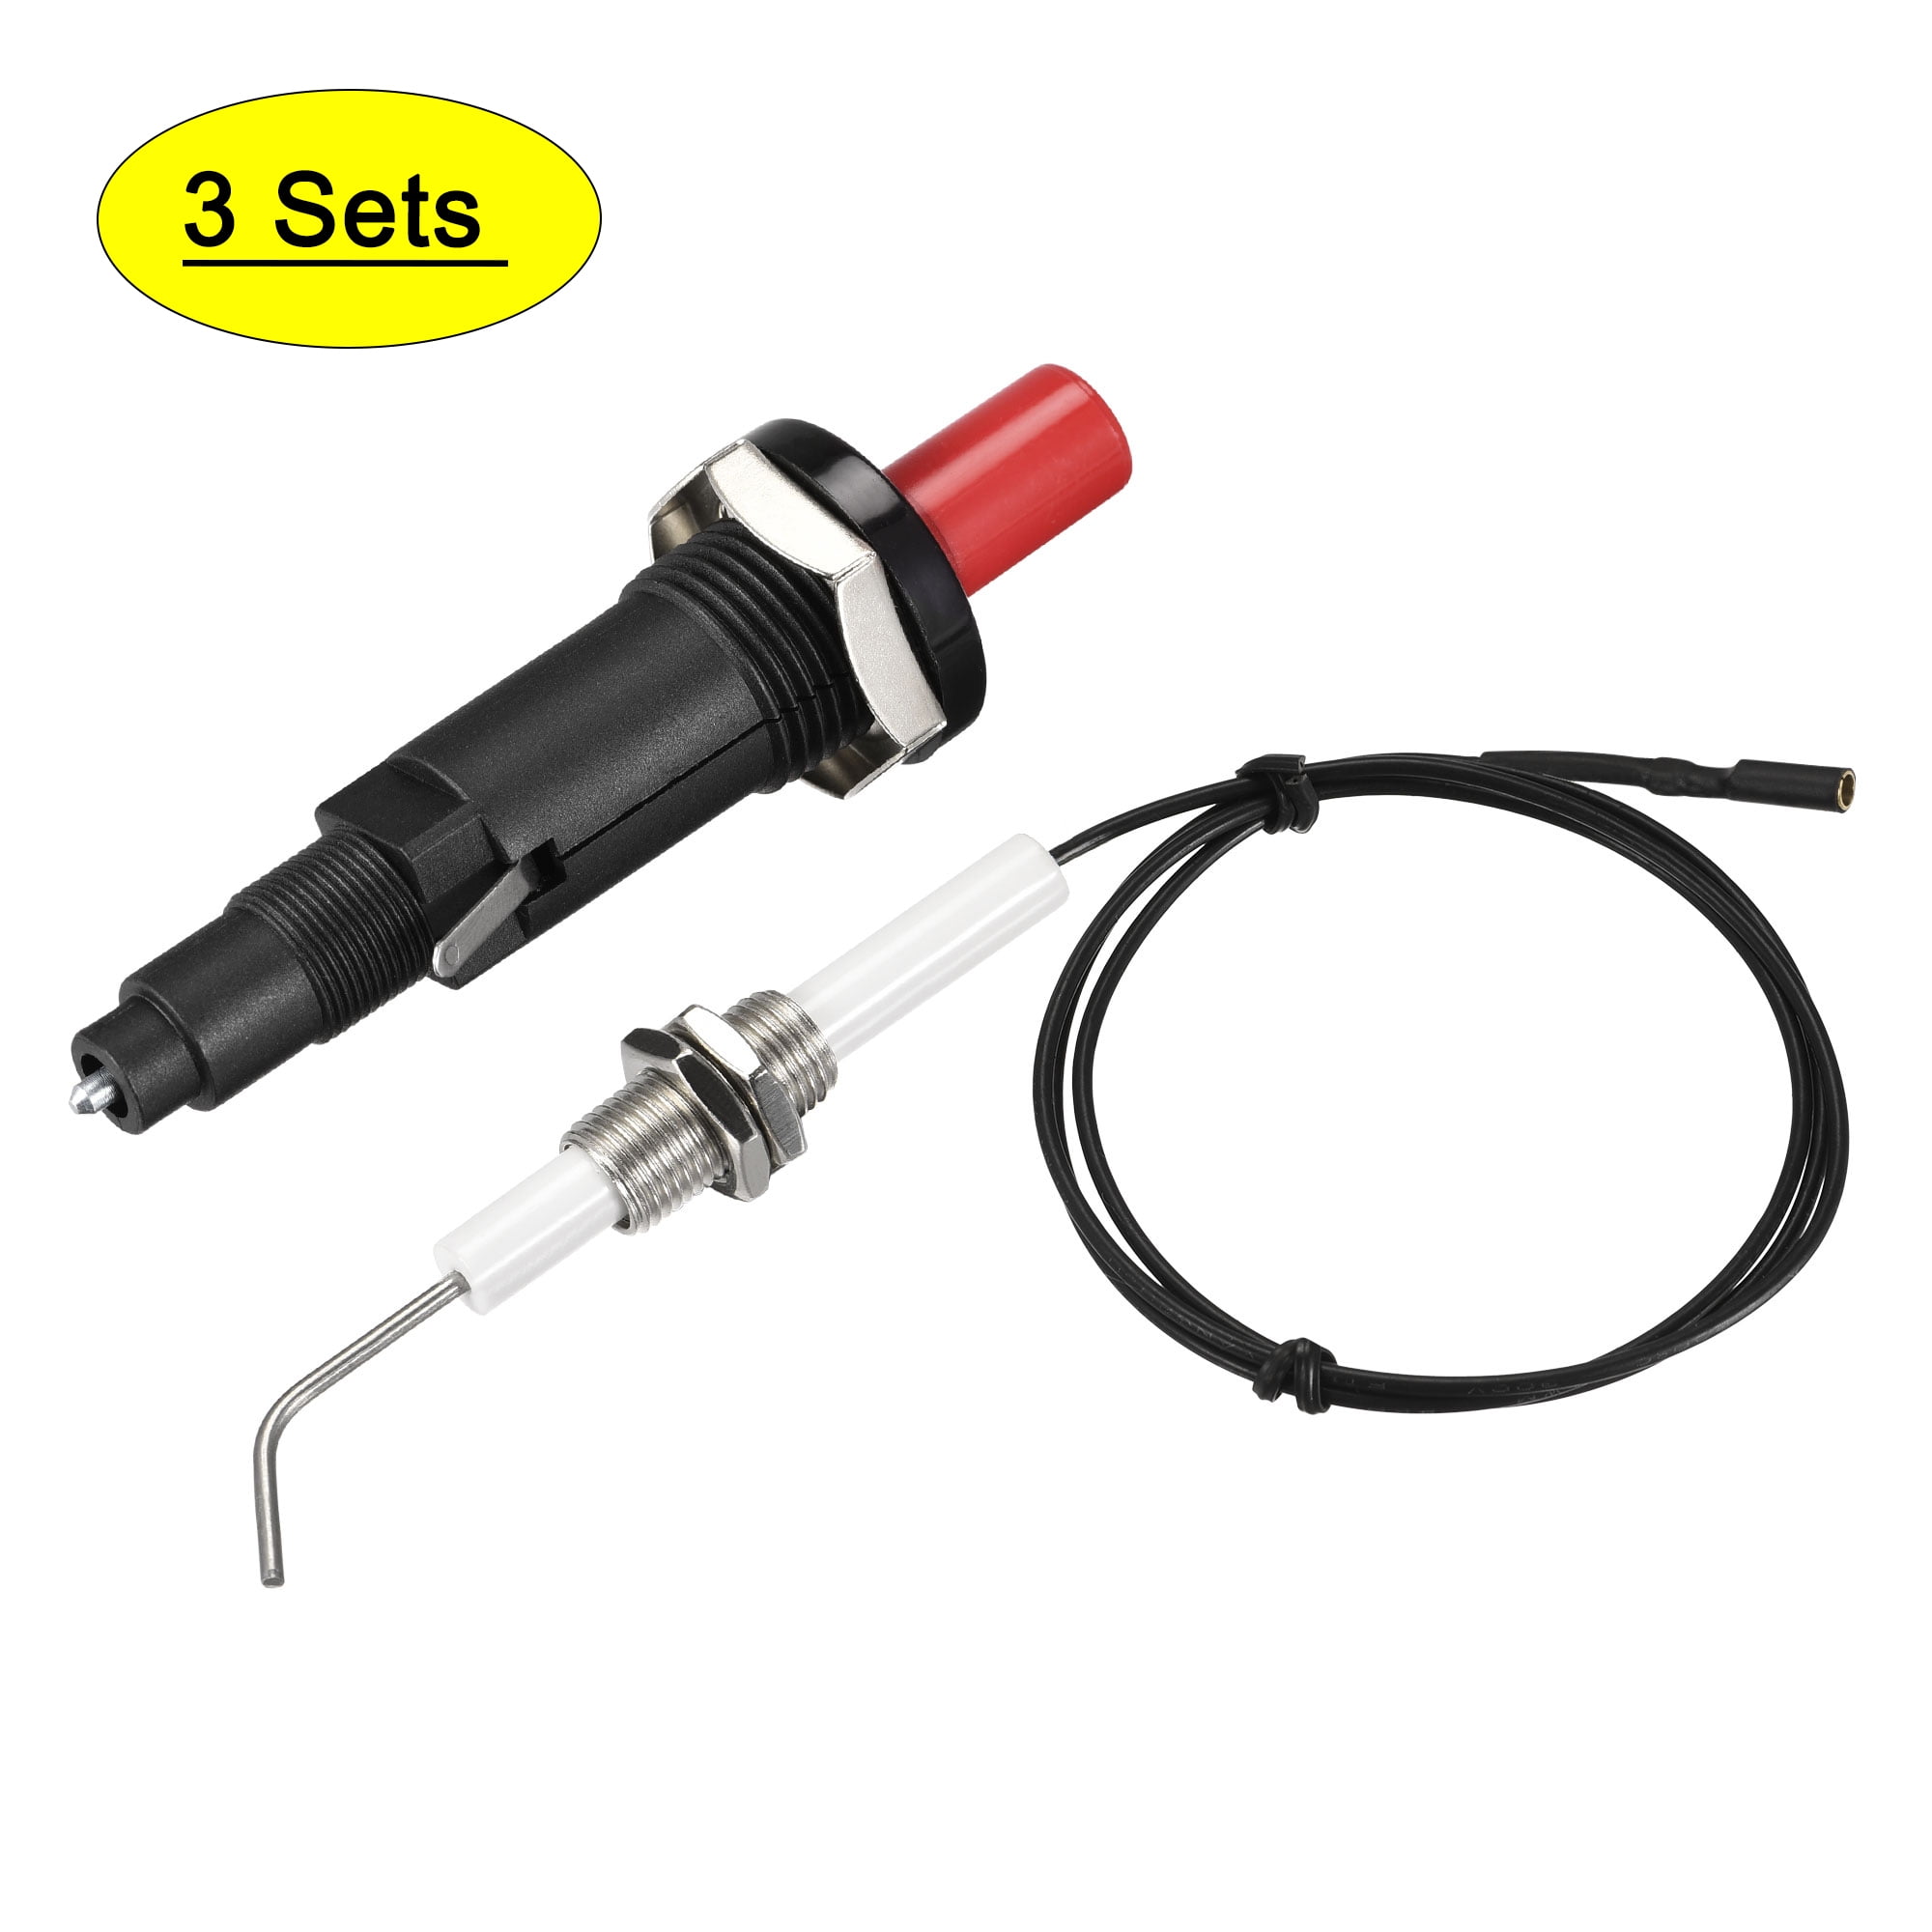 DUAL OUTLET GAS PIEZO SPARK IGNITION IGNITOR 18MM HOLE PIN & SPADE CONNECTION 